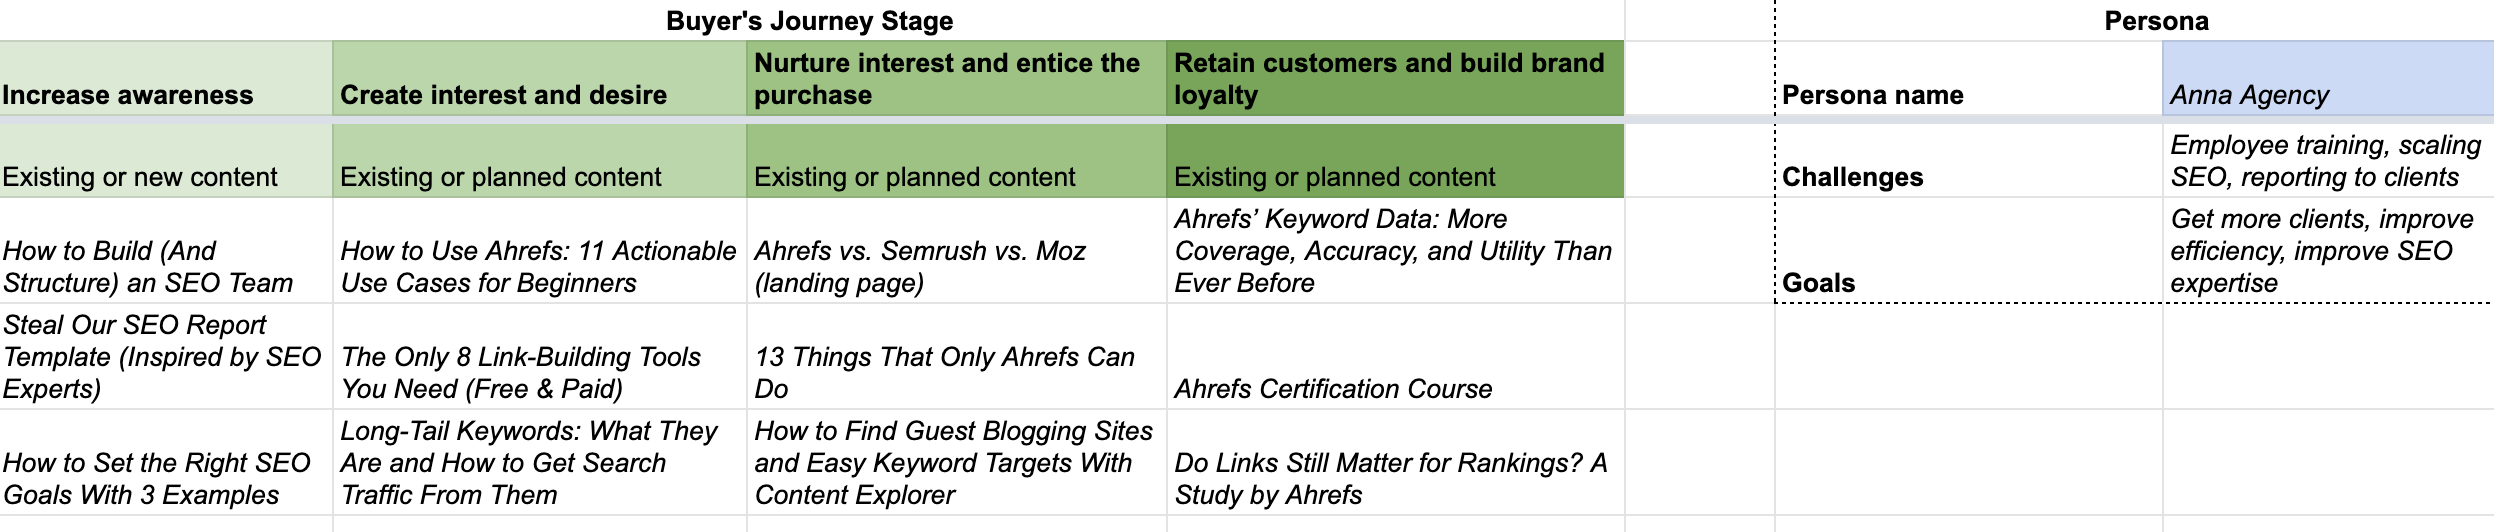 Example of Ahrefs' content map showing buyer's journey stages and persona 